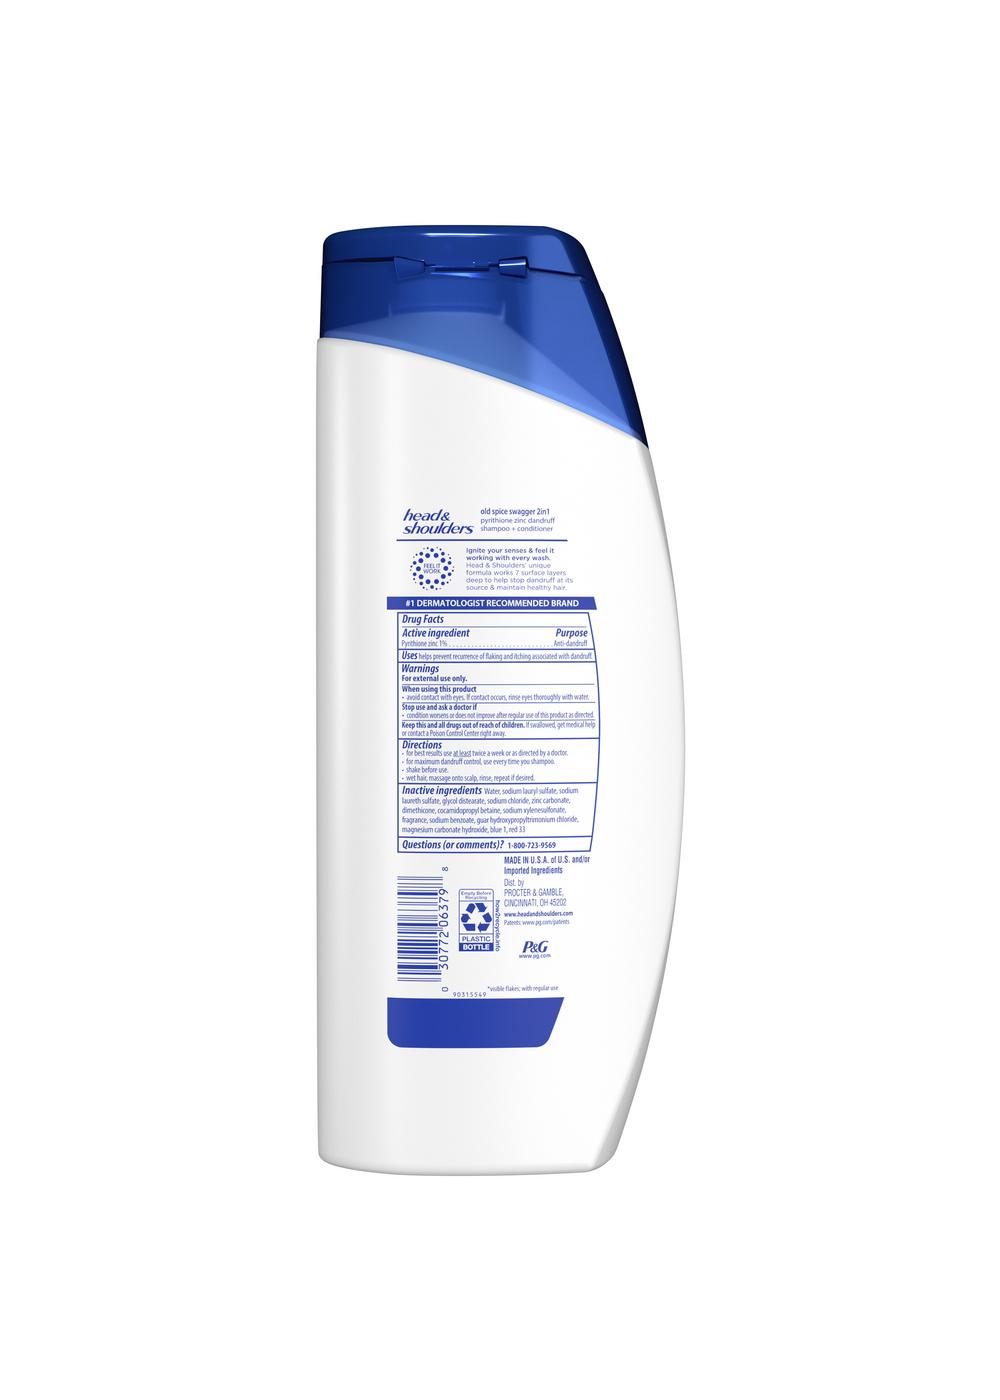 Head & Shoulders Old Spice 2 in 1 Men Dandruff Shampoo + Conditioner - Swagger; image 2 of 11